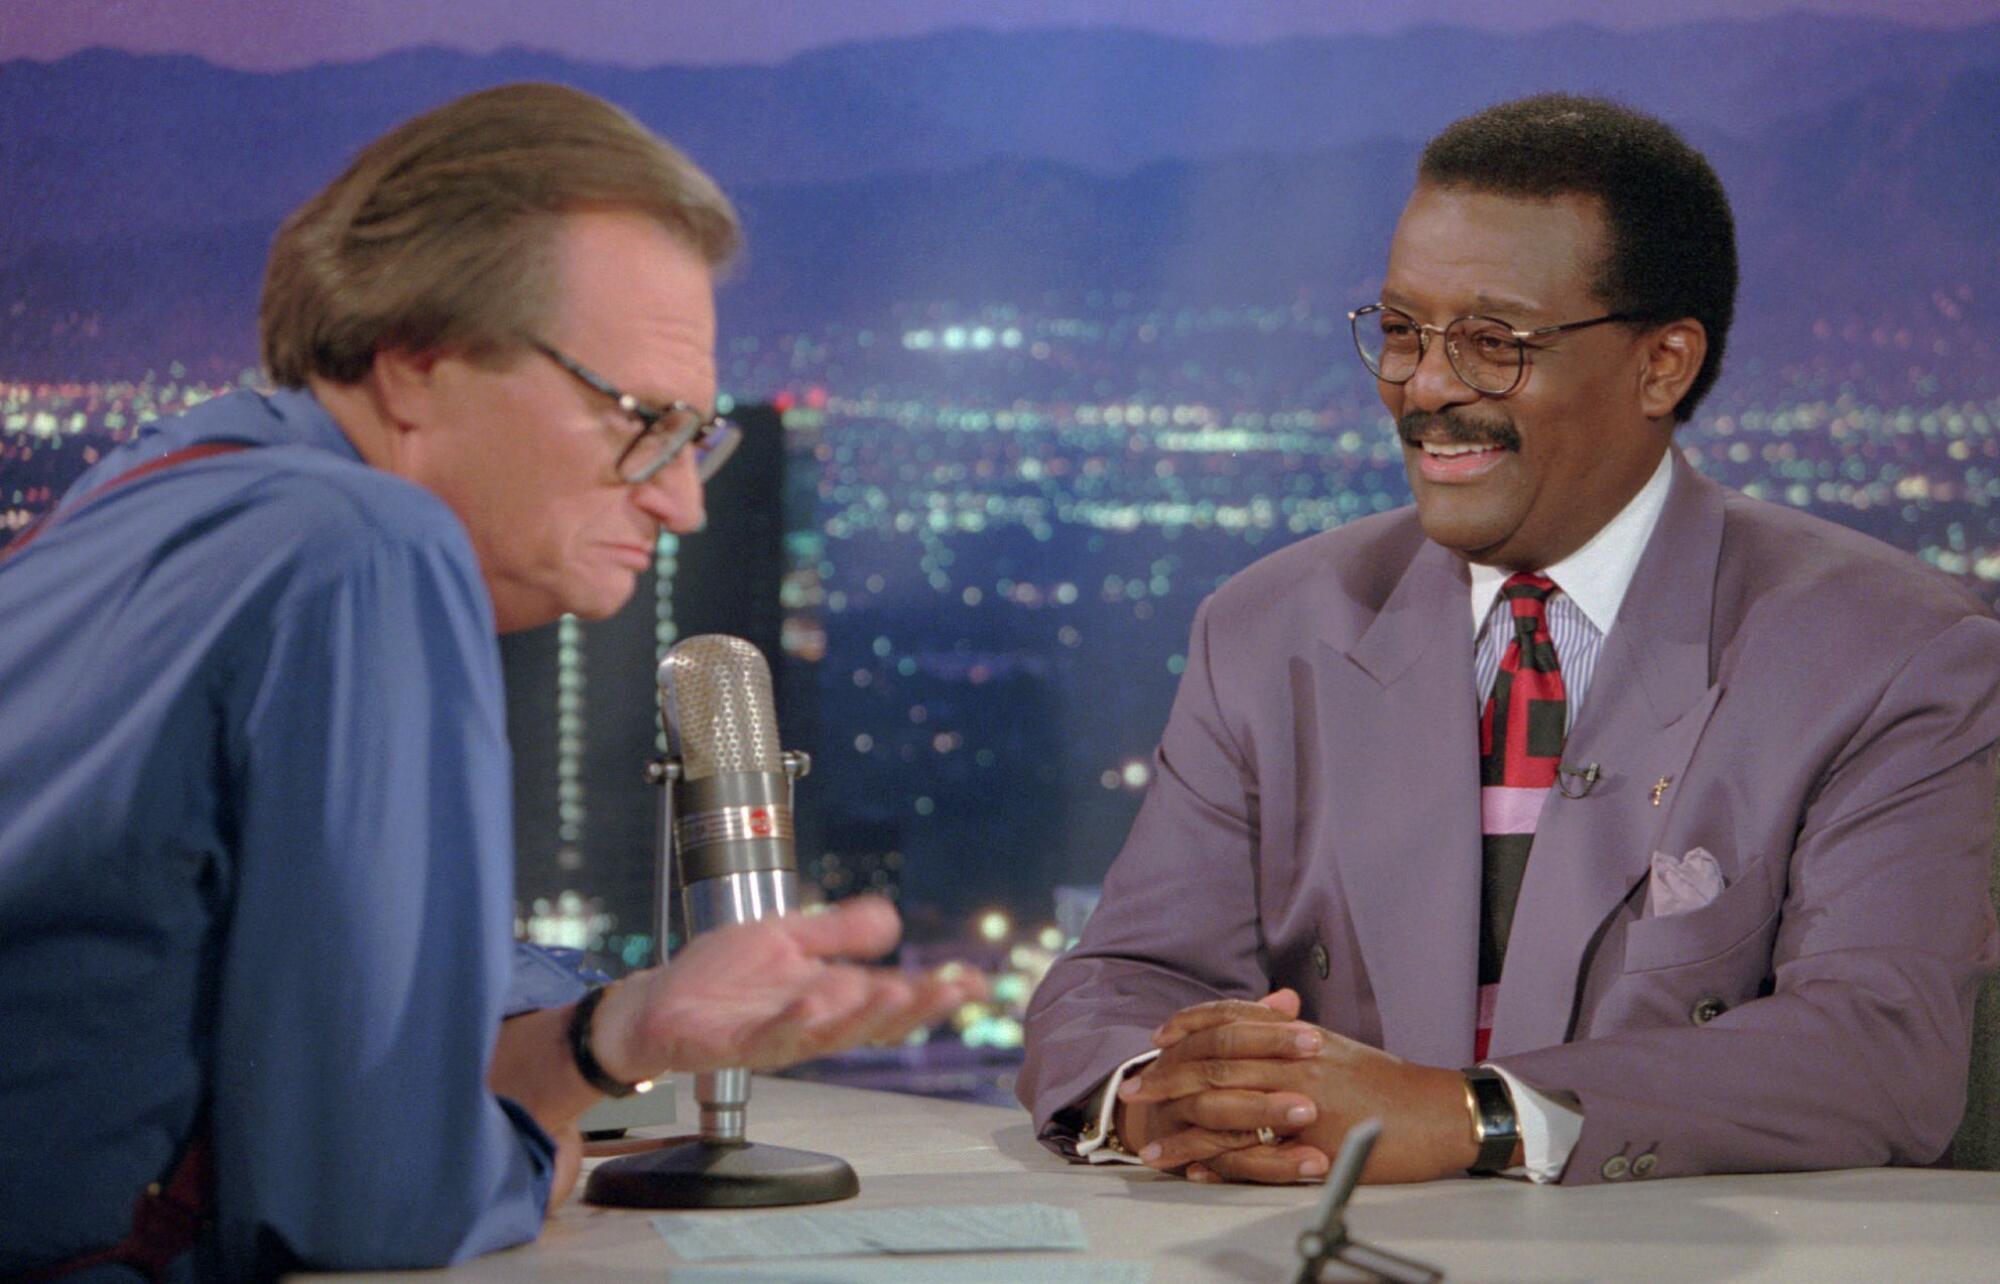 Defense attorney Johnnie Cochran Jr., right, is interviewed by Larry King on "Larry King Live" show on Oct. 4, 1995.